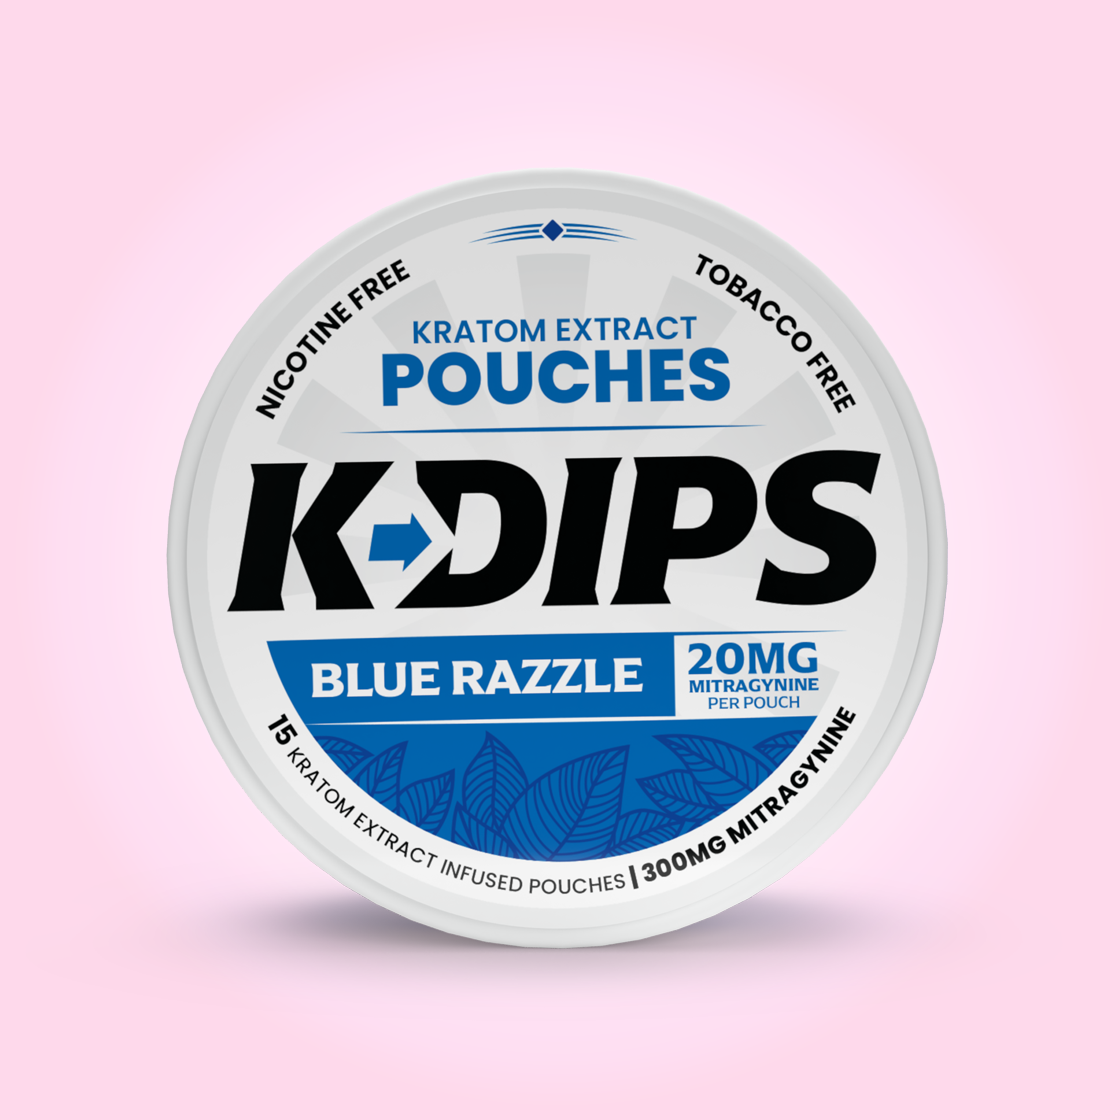 Featured image depicting the dip canister and label for K-Dips, Kratom Dip Pouches. Blue Razzle Flavor